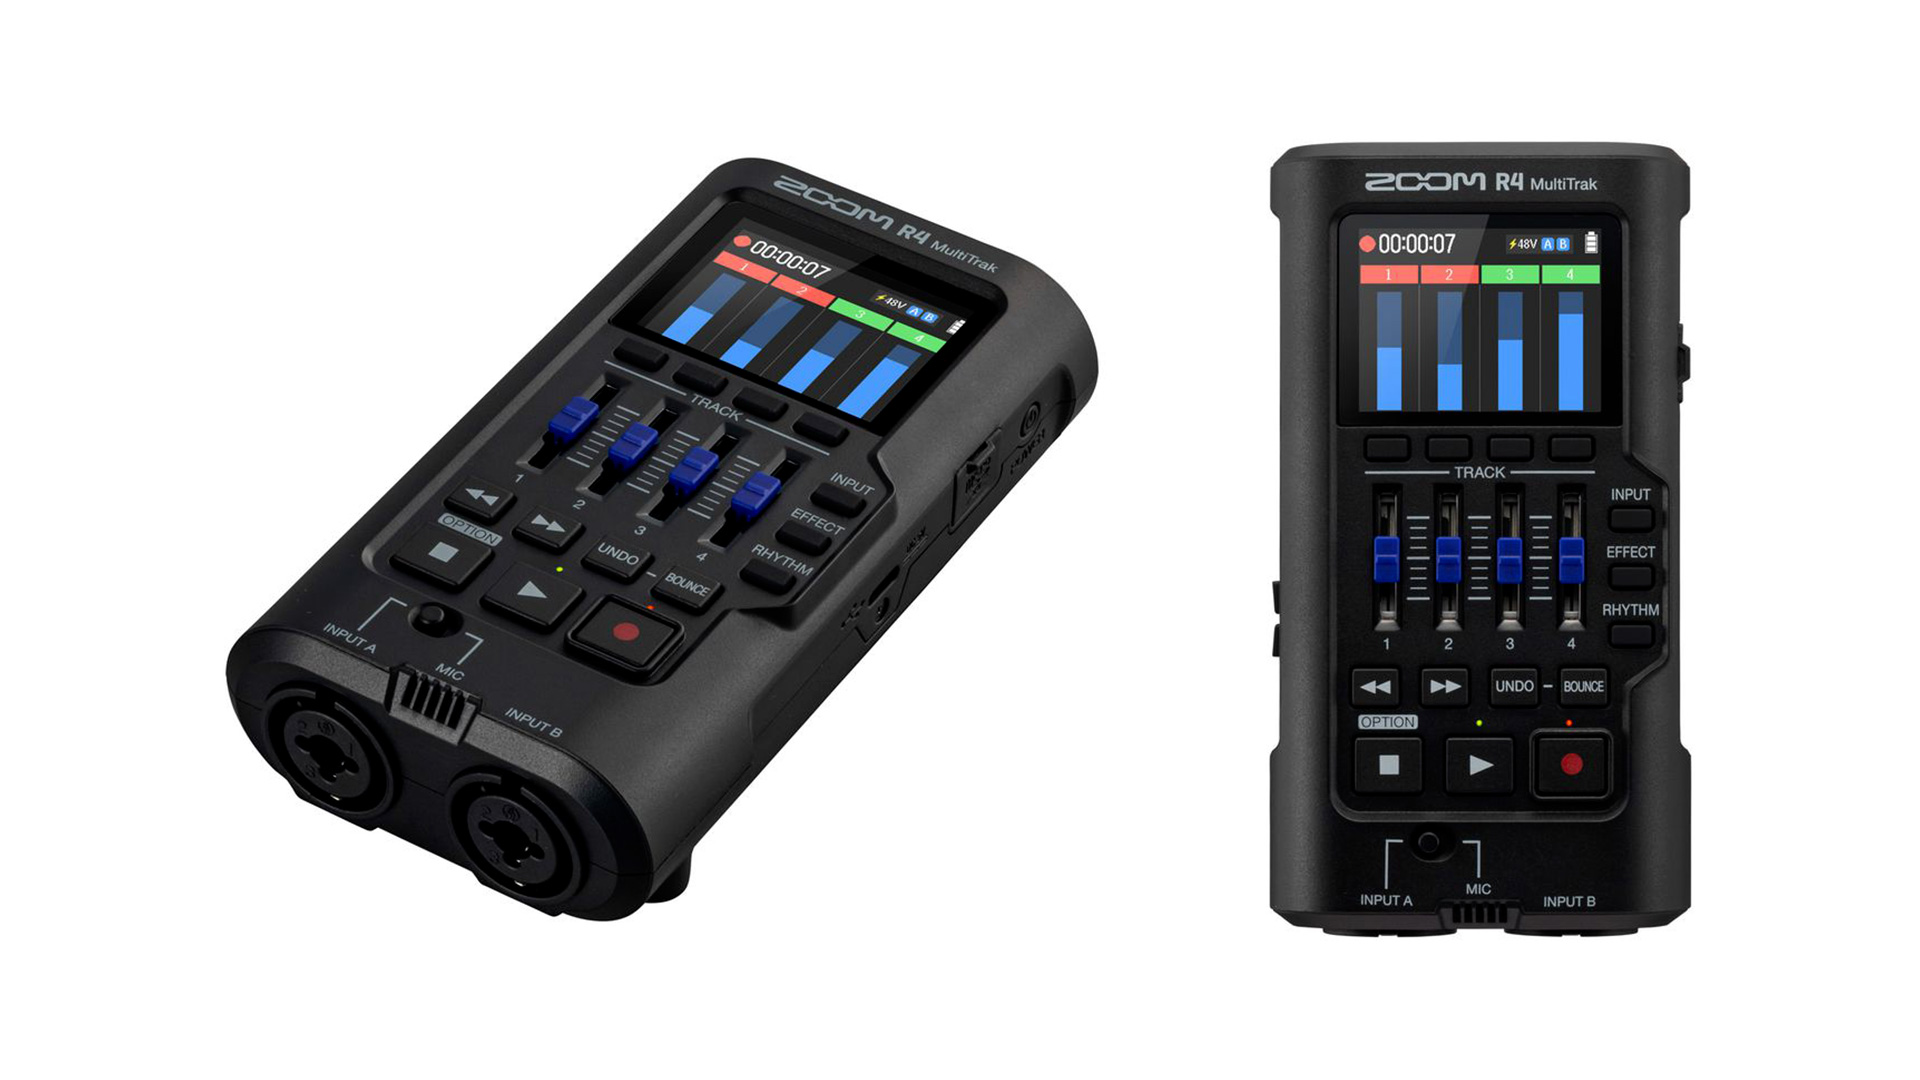 RENTAL ONLY - Zoom H4n Pro 4-Channel Handy Recorder